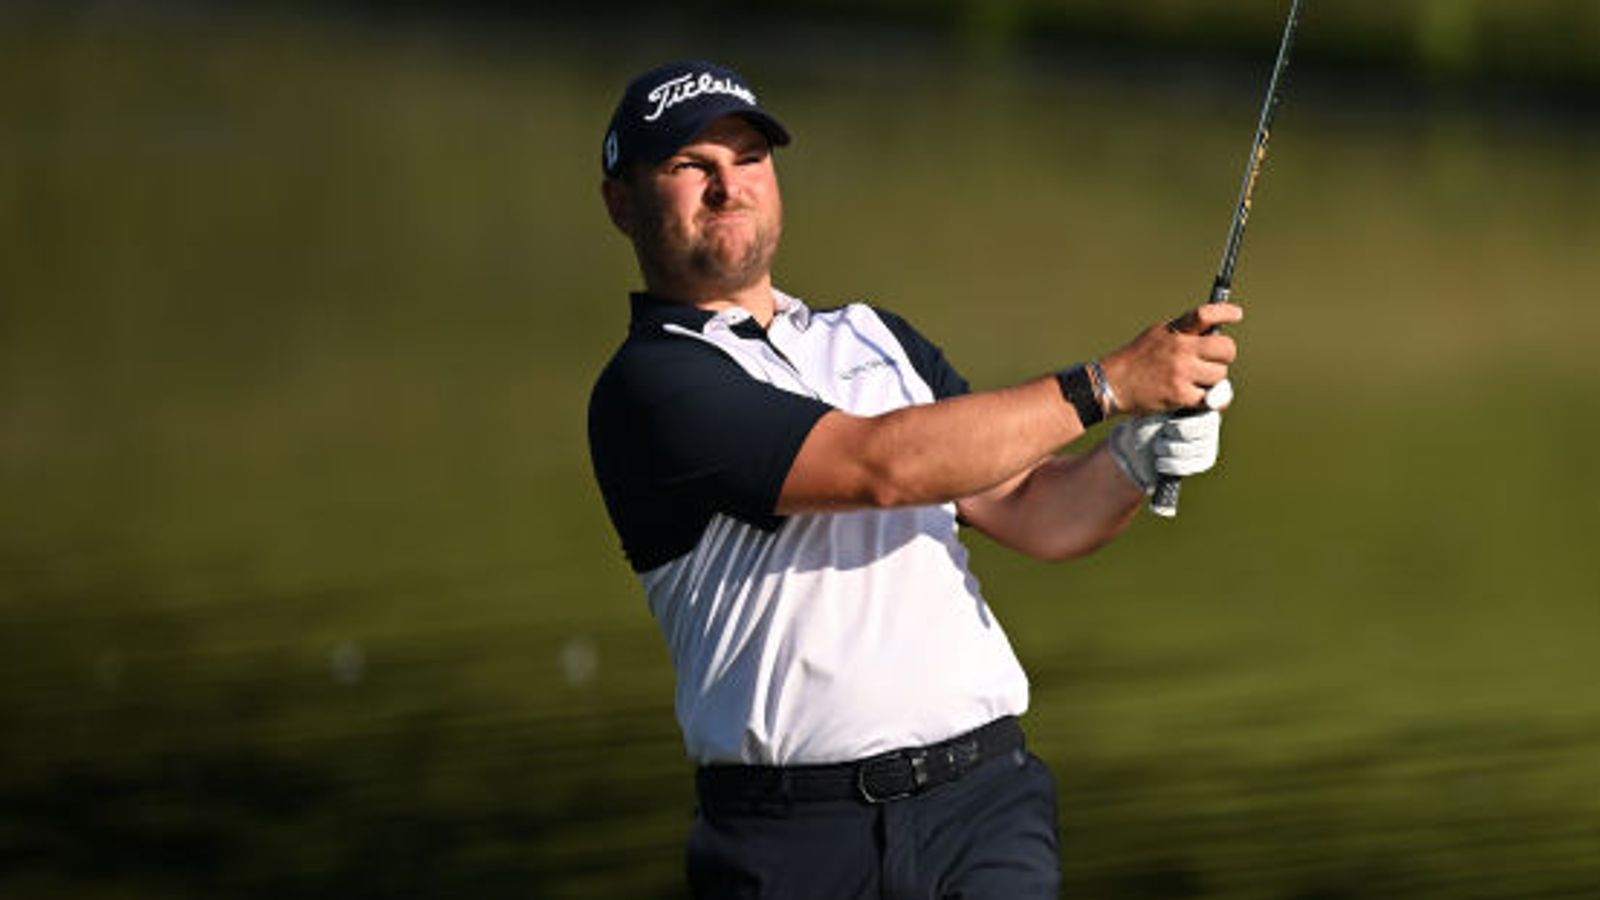 England’s Jordan Smith leads Portugal Masters by one shot after bogey-free 62